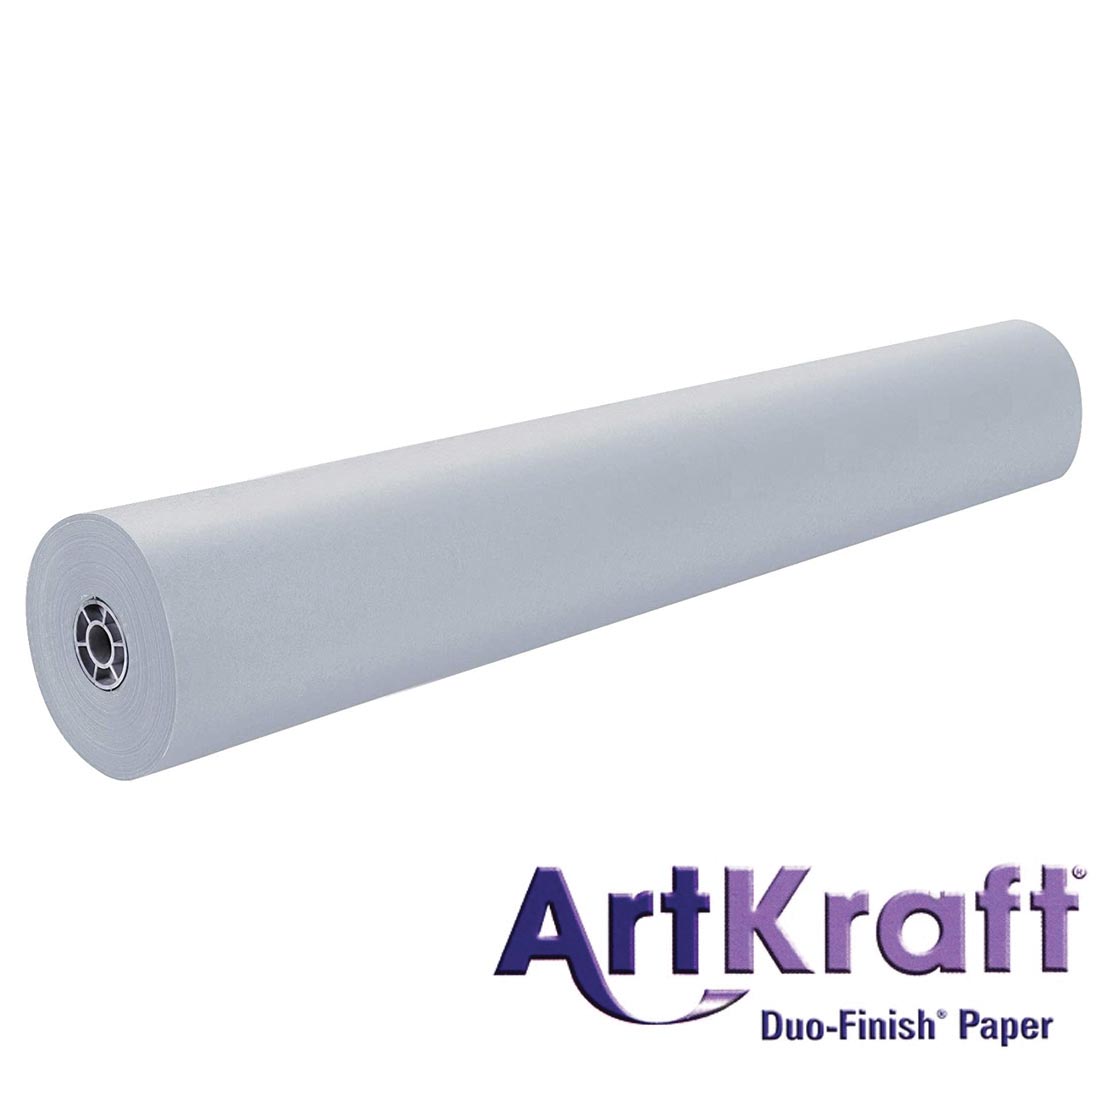 Roll of Gray Paper with text ArtKraft Duo-Finish Paper